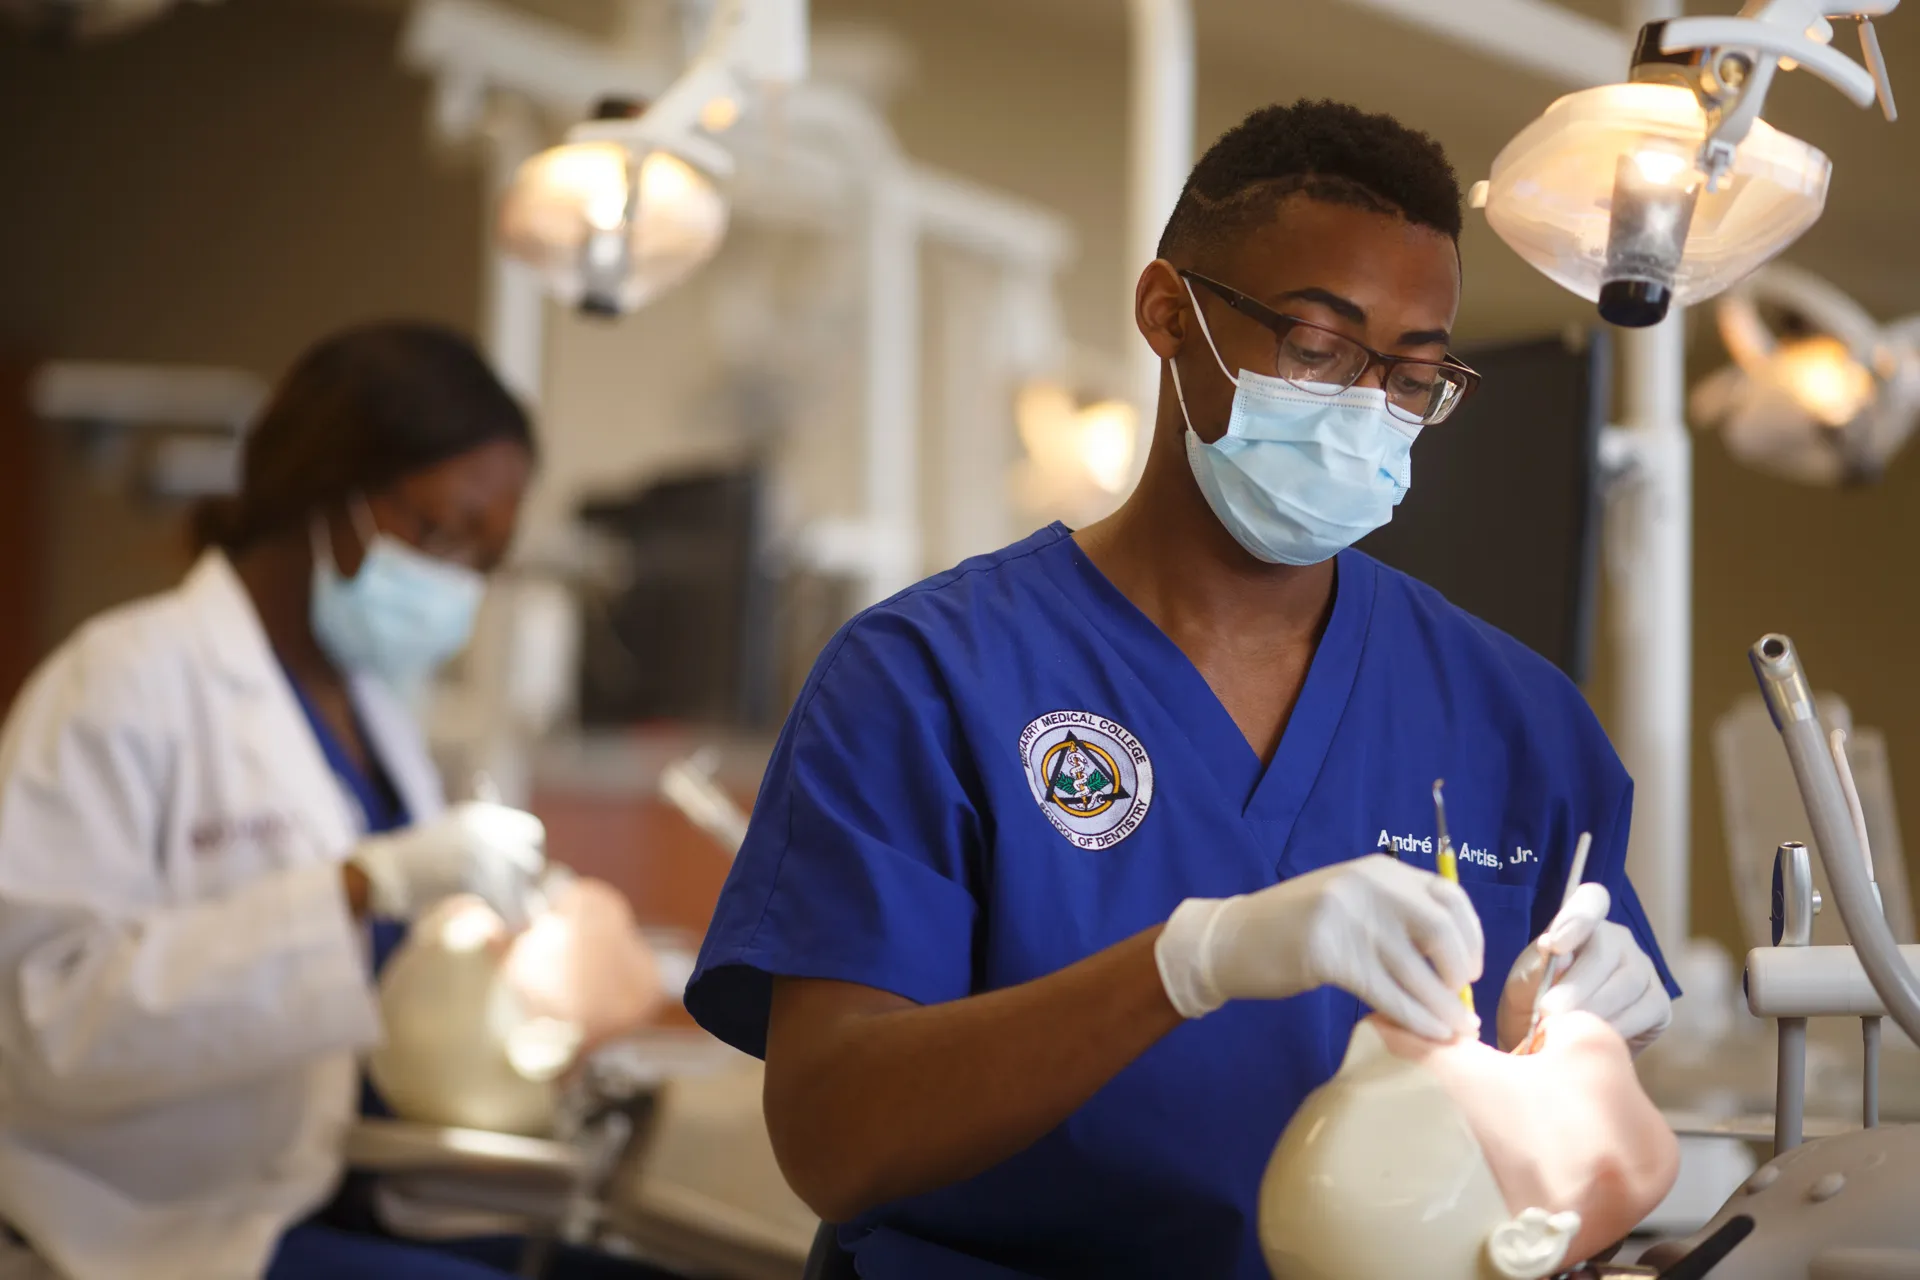 Best Dental Hygiene Schools In Kentucky| Cost, Requirement & How To Apply